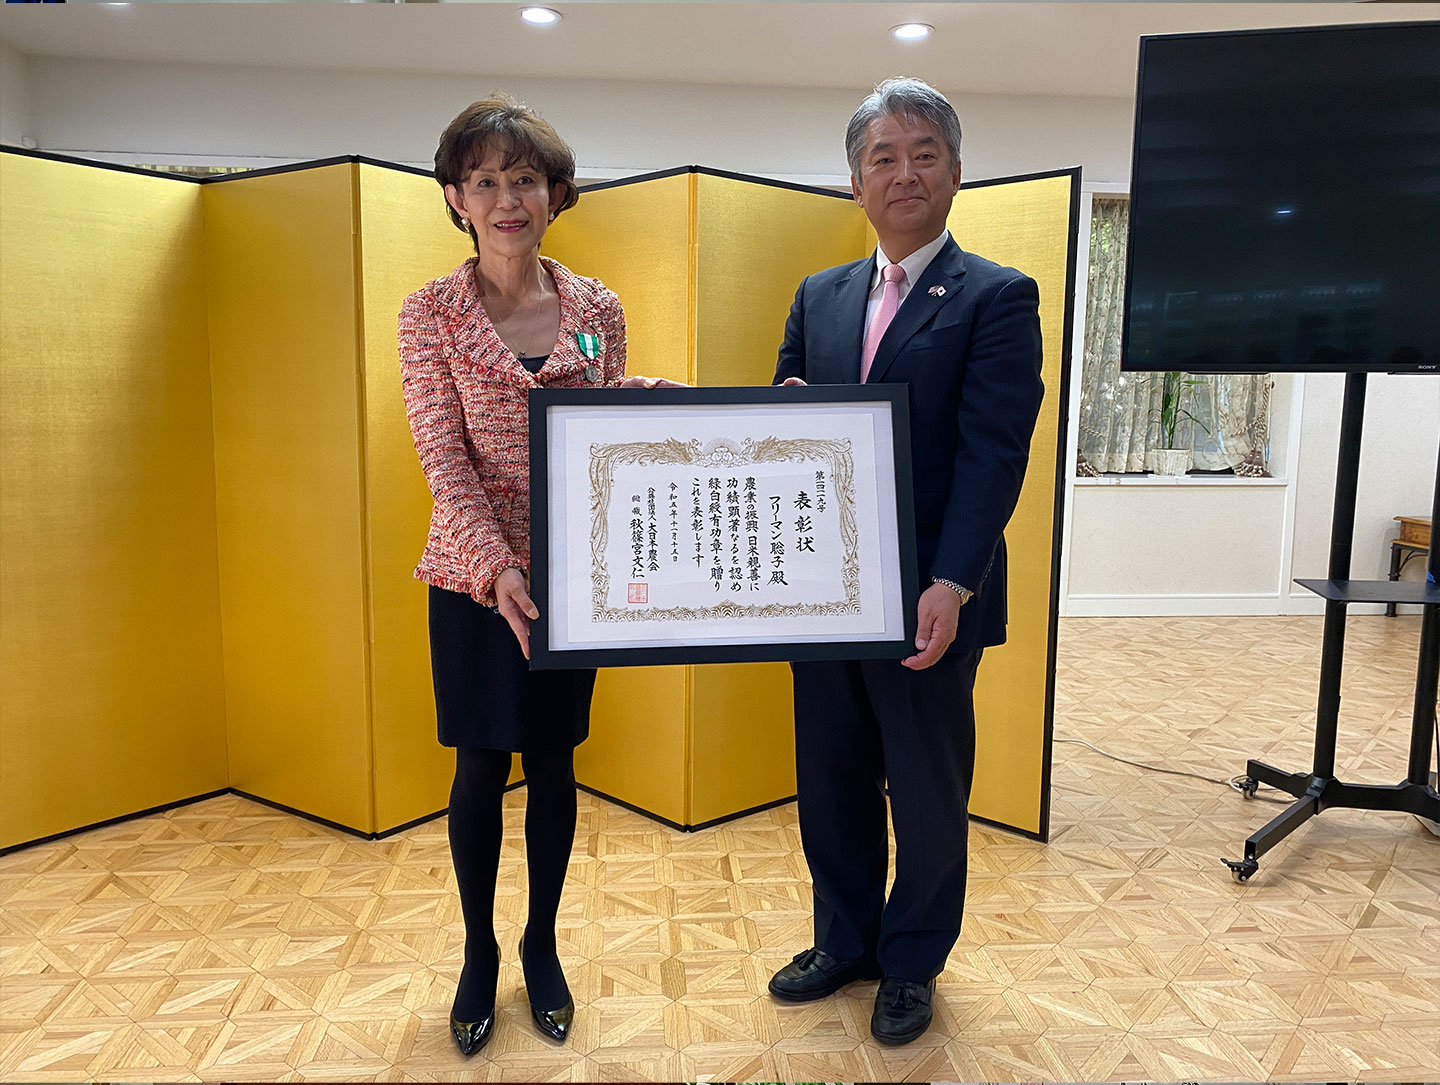 Historic Award for Akiko Freeman: The Green & White Medal for Agricultural Excellence